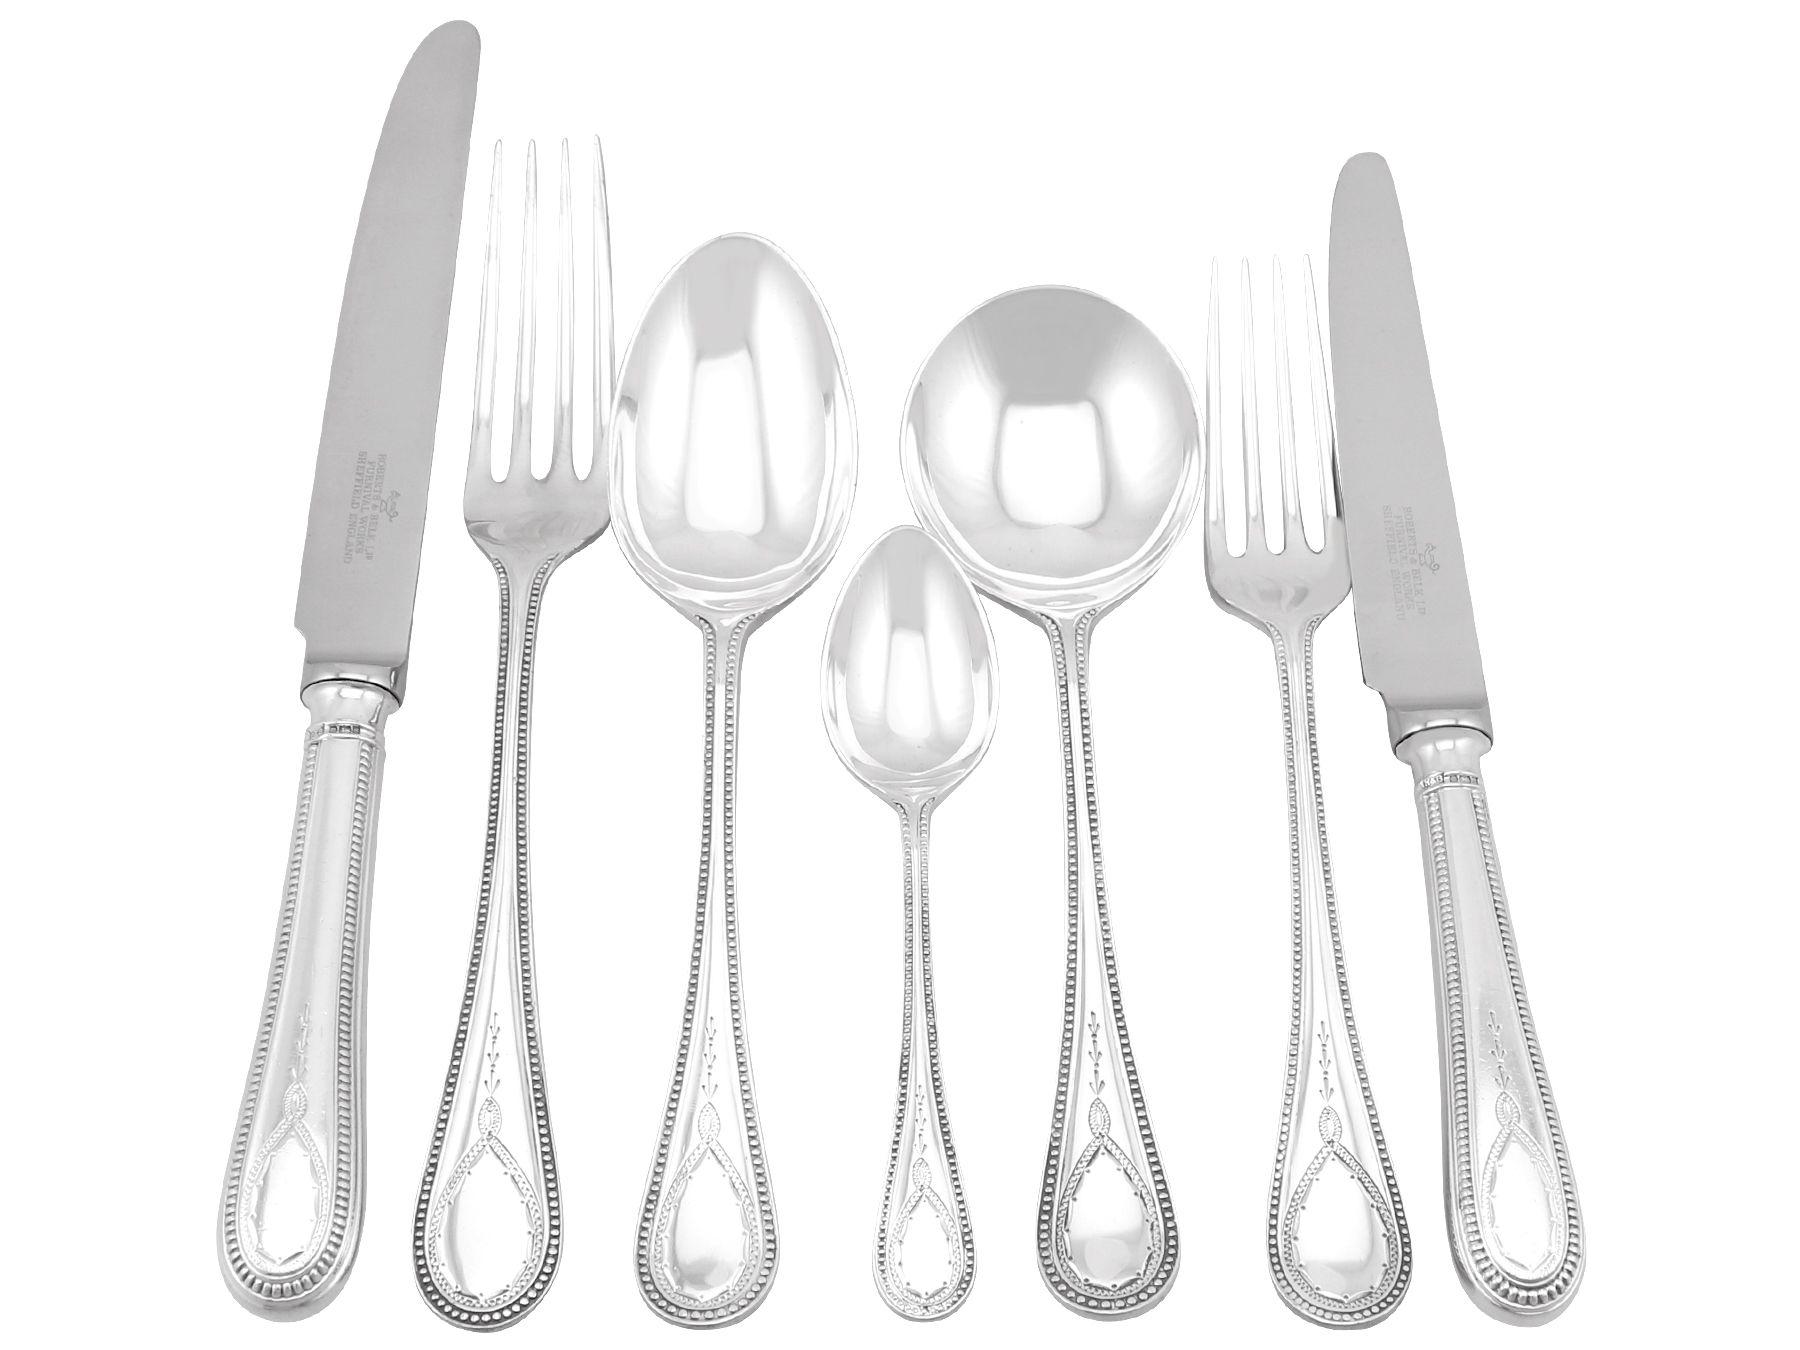 An exceptional, fine and impressive vintage Elizabeth II English sterling silver straight Old English Bead pattern canteen of cutlery for eight persons; an addition to our silver flatware sets

The pieces of this exceptional vintage straight*